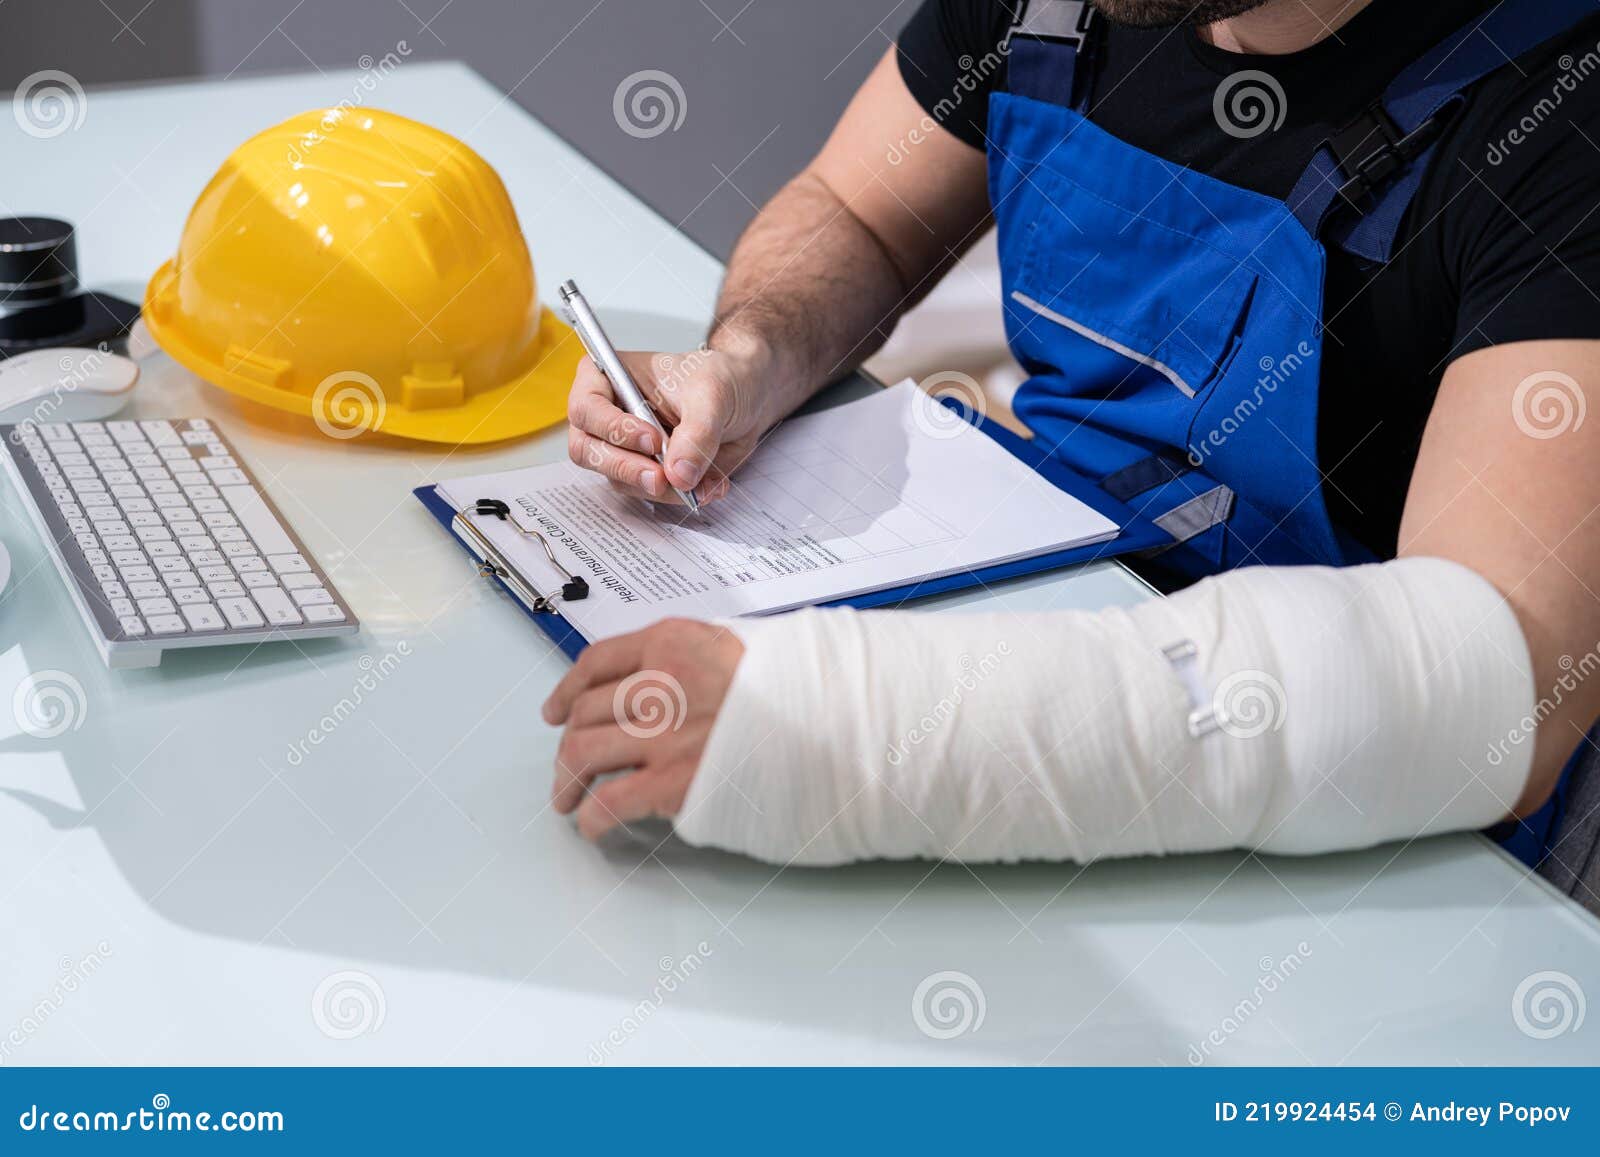 worker accident insurance disability compensation